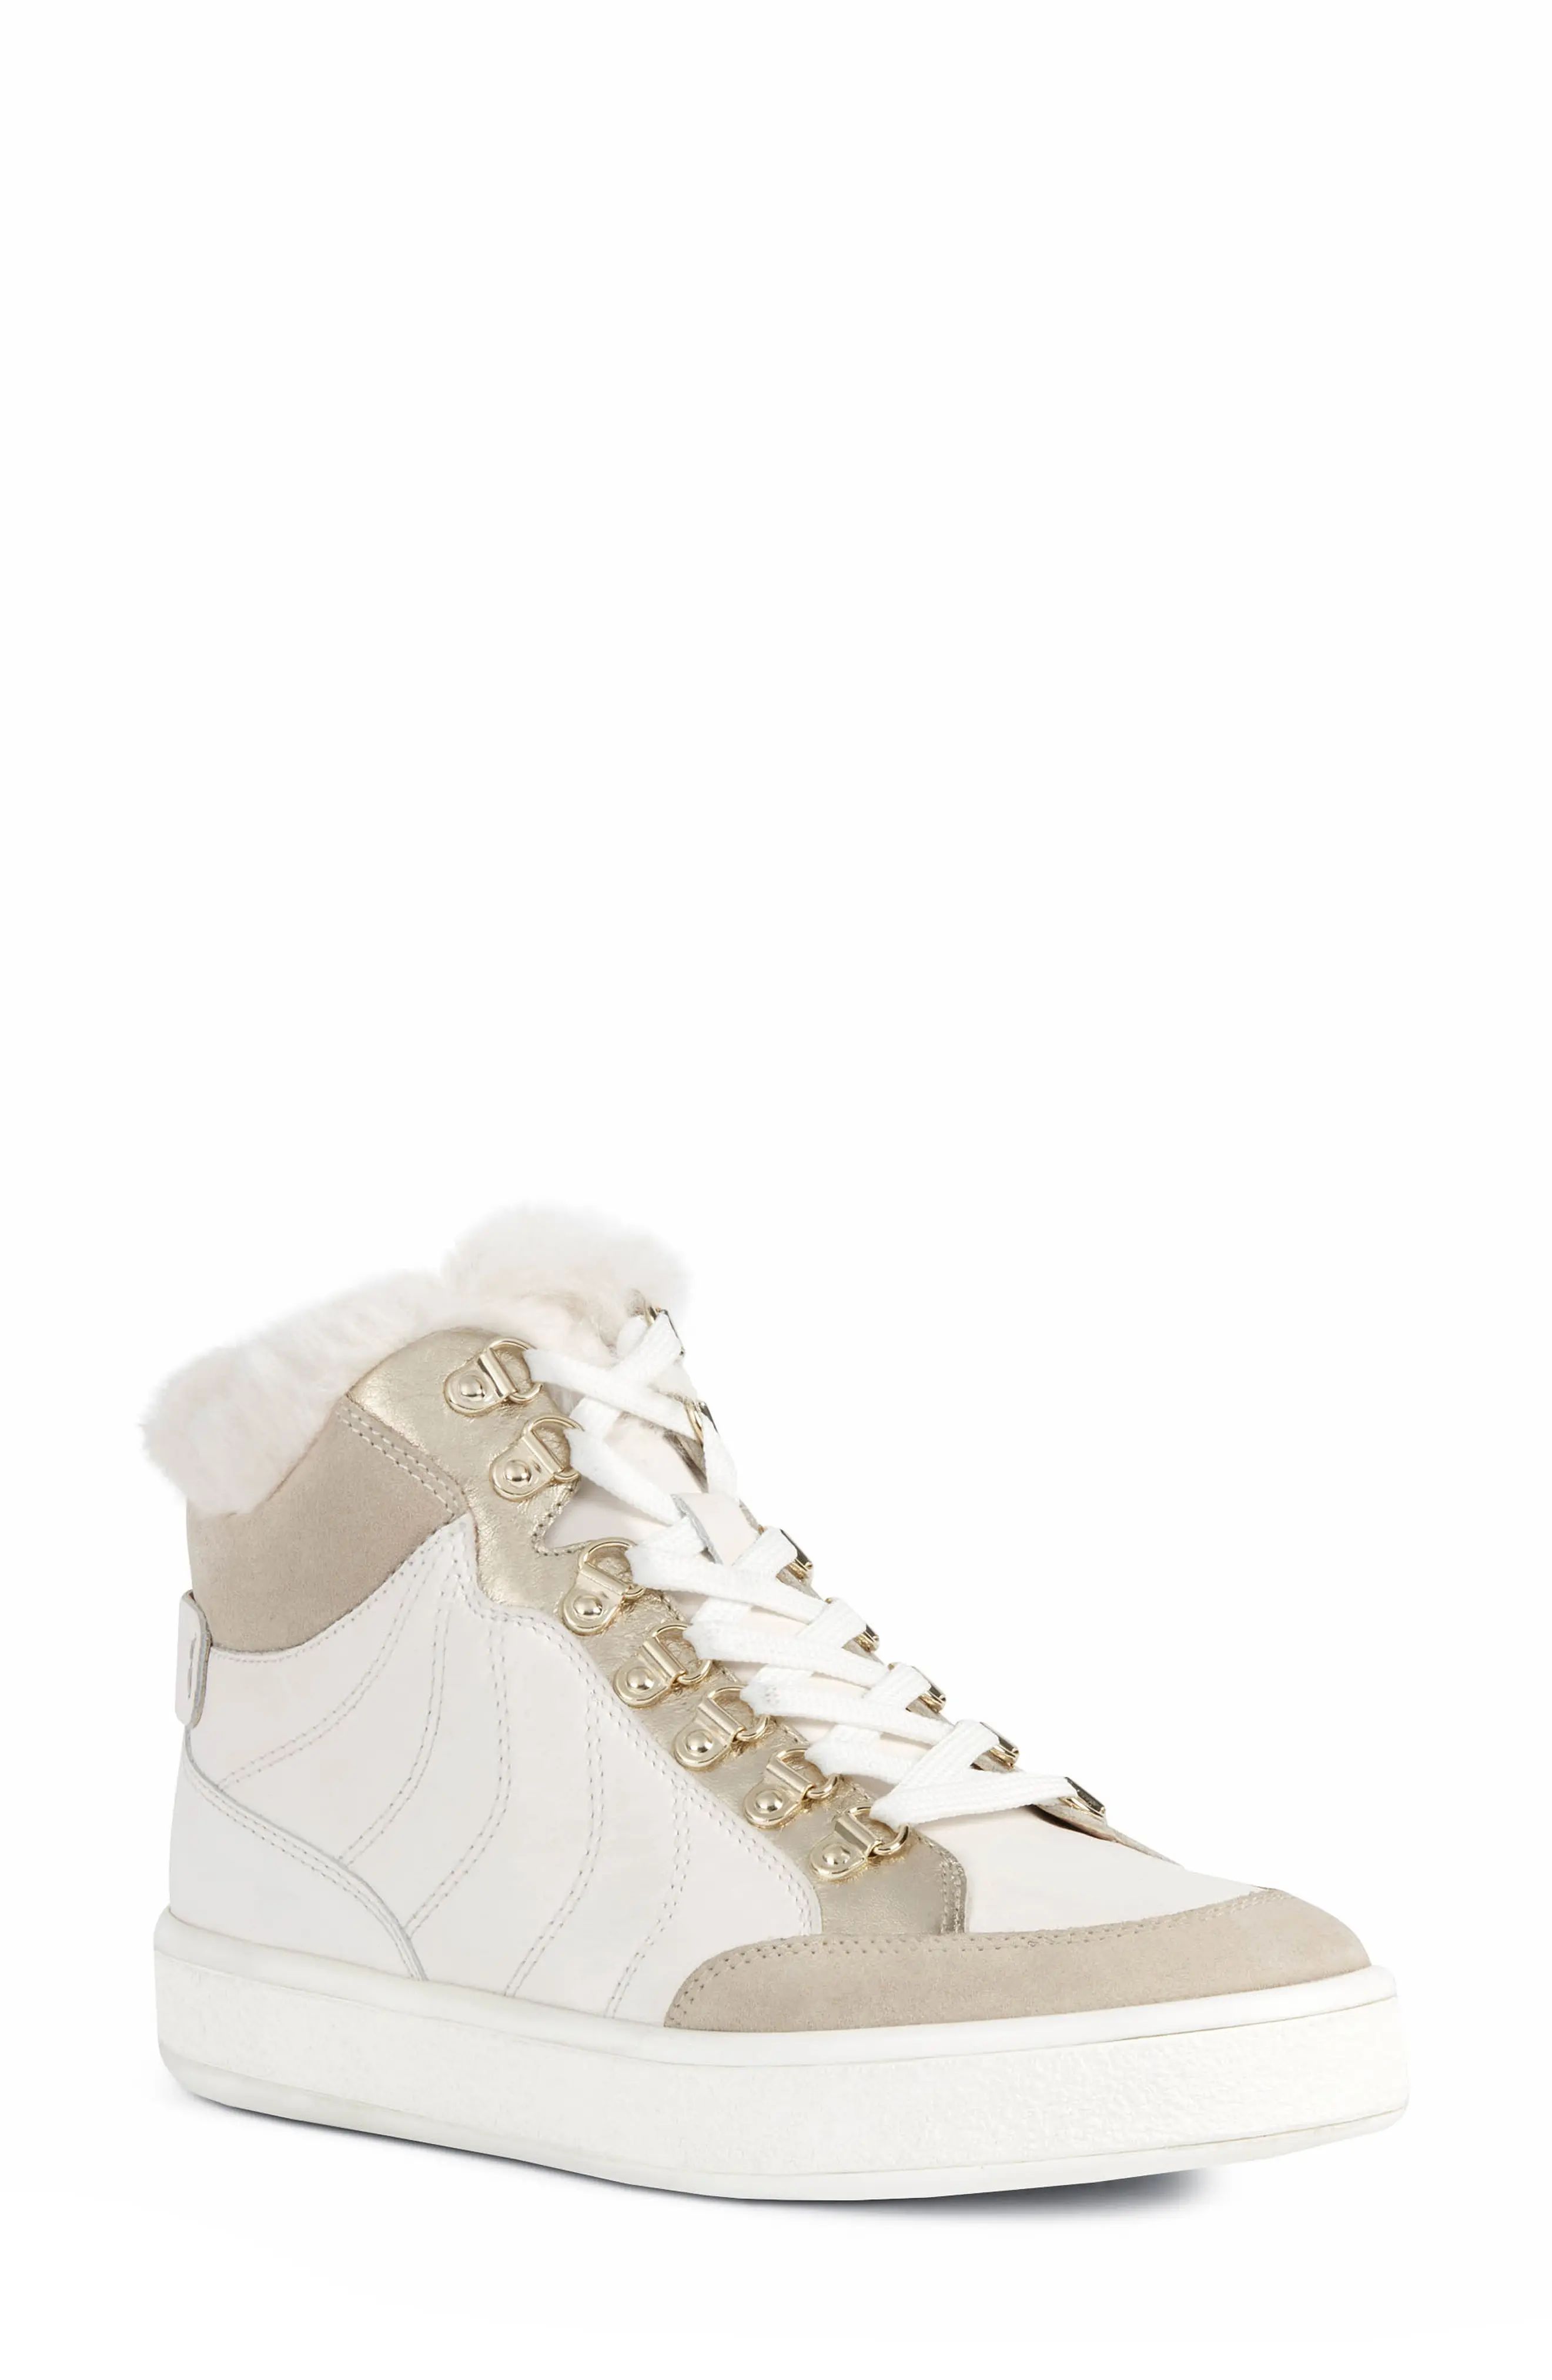 Geox Leelu Faux Fur Lined High Top Sneaker in Off White/Light Taupe at Nordstrom, Size 8Us | Nordstrom